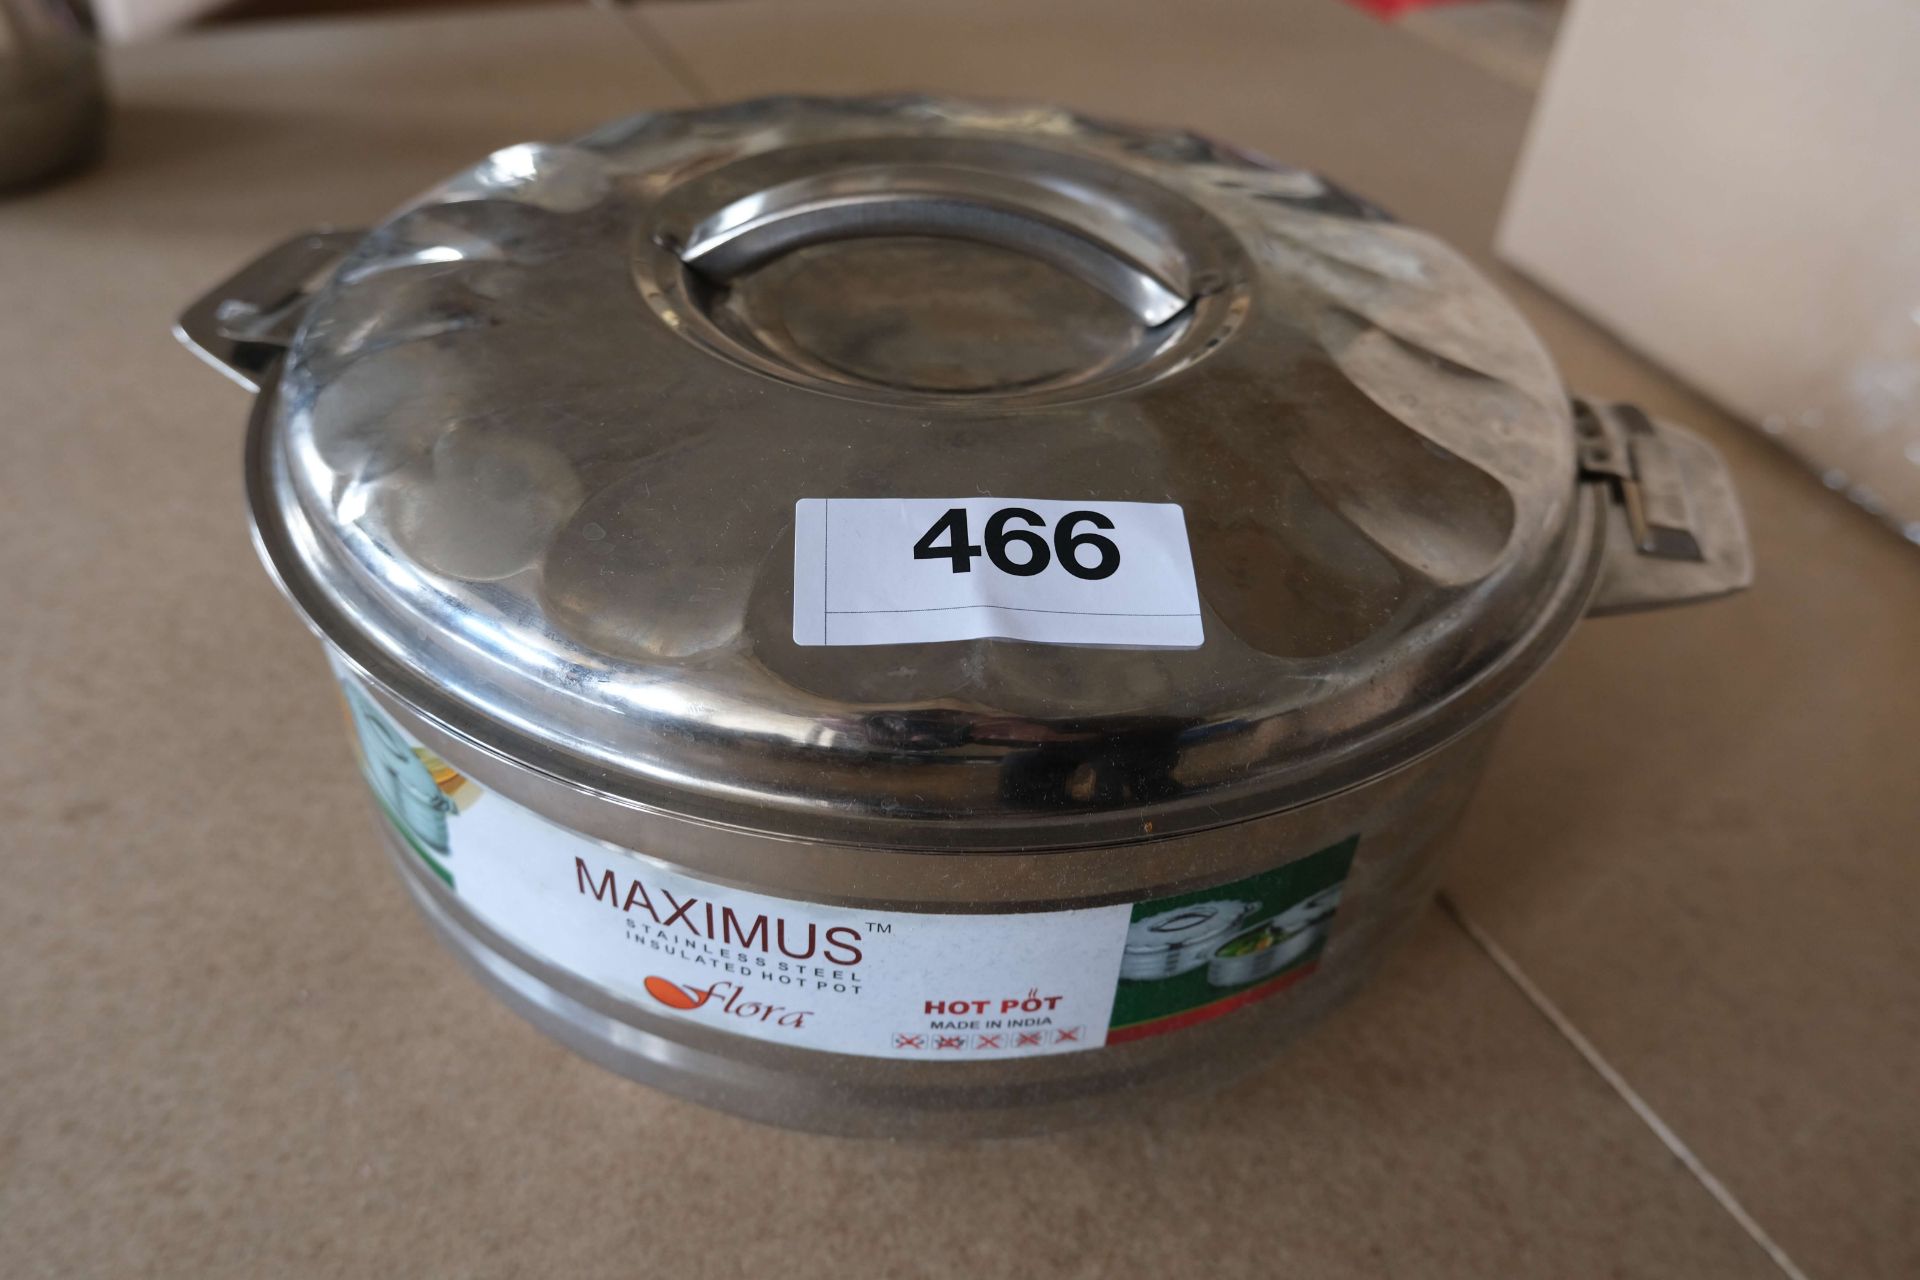 Maximus Stainless Steel Insulated Hot Pot